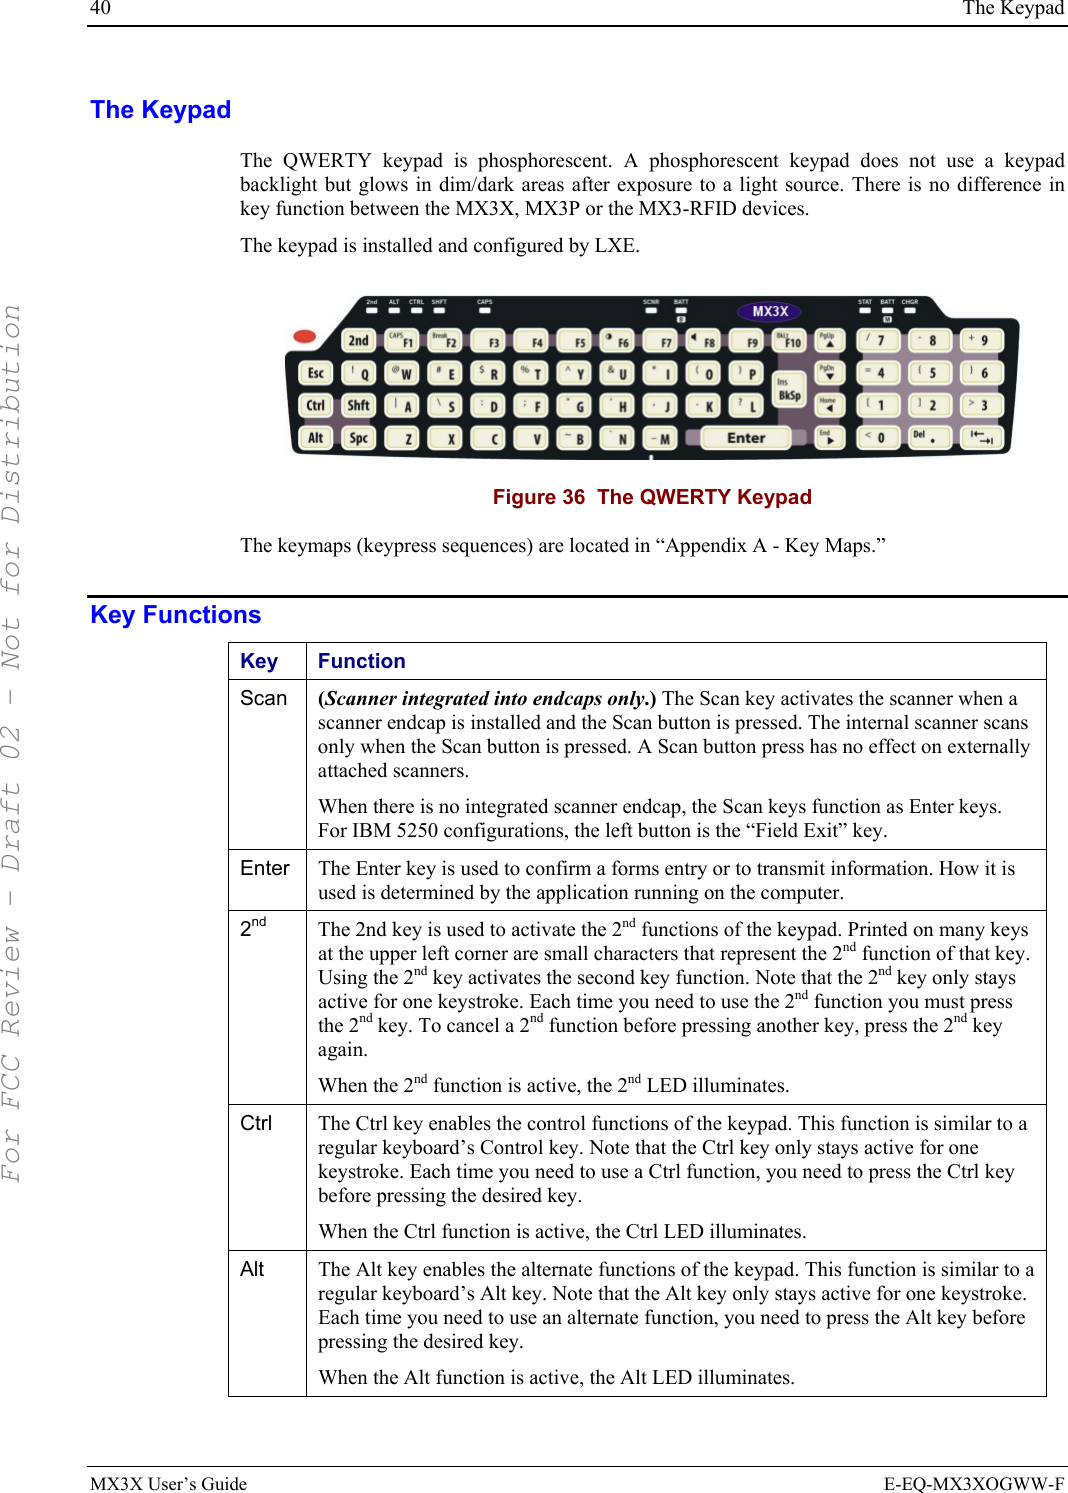 40  The Keypad MX3X User’s Guide  E-EQ-MX3XOGWW-F The Keypad The QWERTY keypad is phosphorescent. A phosphorescent keypad does not use a keypad backlight but glows in dim/dark areas after exposure to a light source. There is no difference in key function between the MX3X, MX3P or the MX3-RFID devices. The keypad is installed and configured by LXE.   Figure 36  The QWERTY Keypad The keymaps (keypress sequences) are located in “Appendix A - Key Maps.” Key Functions Key Function Scan  (Scanner integrated into endcaps only.) The Scan key activates the scanner when a scanner endcap is installed and the Scan button is pressed. The internal scanner scans only when the Scan button is pressed. A Scan button press has no effect on externally attached scanners.  When there is no integrated scanner endcap, the Scan keys function as Enter keys. For IBM 5250 configurations, the left button is the “Field Exit” key. Enter  The Enter key is used to confirm a forms entry or to transmit information. How it is used is determined by the application running on the computer. 2nd The 2nd key is used to activate the 2nd functions of the keypad. Printed on many keys at the upper left corner are small characters that represent the 2nd function of that key. Using the 2nd key activates the second key function. Note that the 2nd key only stays active for one keystroke. Each time you need to use the 2nd function you must press the 2nd key. To cancel a 2nd function before pressing another key, press the 2nd key again.  When the 2nd function is active, the 2nd LED illuminates. Ctrl  The Ctrl key enables the control functions of the keypad. This function is similar to a regular keyboard’s Control key. Note that the Ctrl key only stays active for one keystroke. Each time you need to use a Ctrl function, you need to press the Ctrl key before pressing the desired key.  When the Ctrl function is active, the Ctrl LED illuminates. Alt  The Alt key enables the alternate functions of the keypad. This function is similar to a regular keyboard’s Alt key. Note that the Alt key only stays active for one keystroke. Each time you need to use an alternate function, you need to press the Alt key before pressing the desired key.  When the Alt function is active, the Alt LED illuminates. For FCC Review - Draft 02 - Not for Distribution